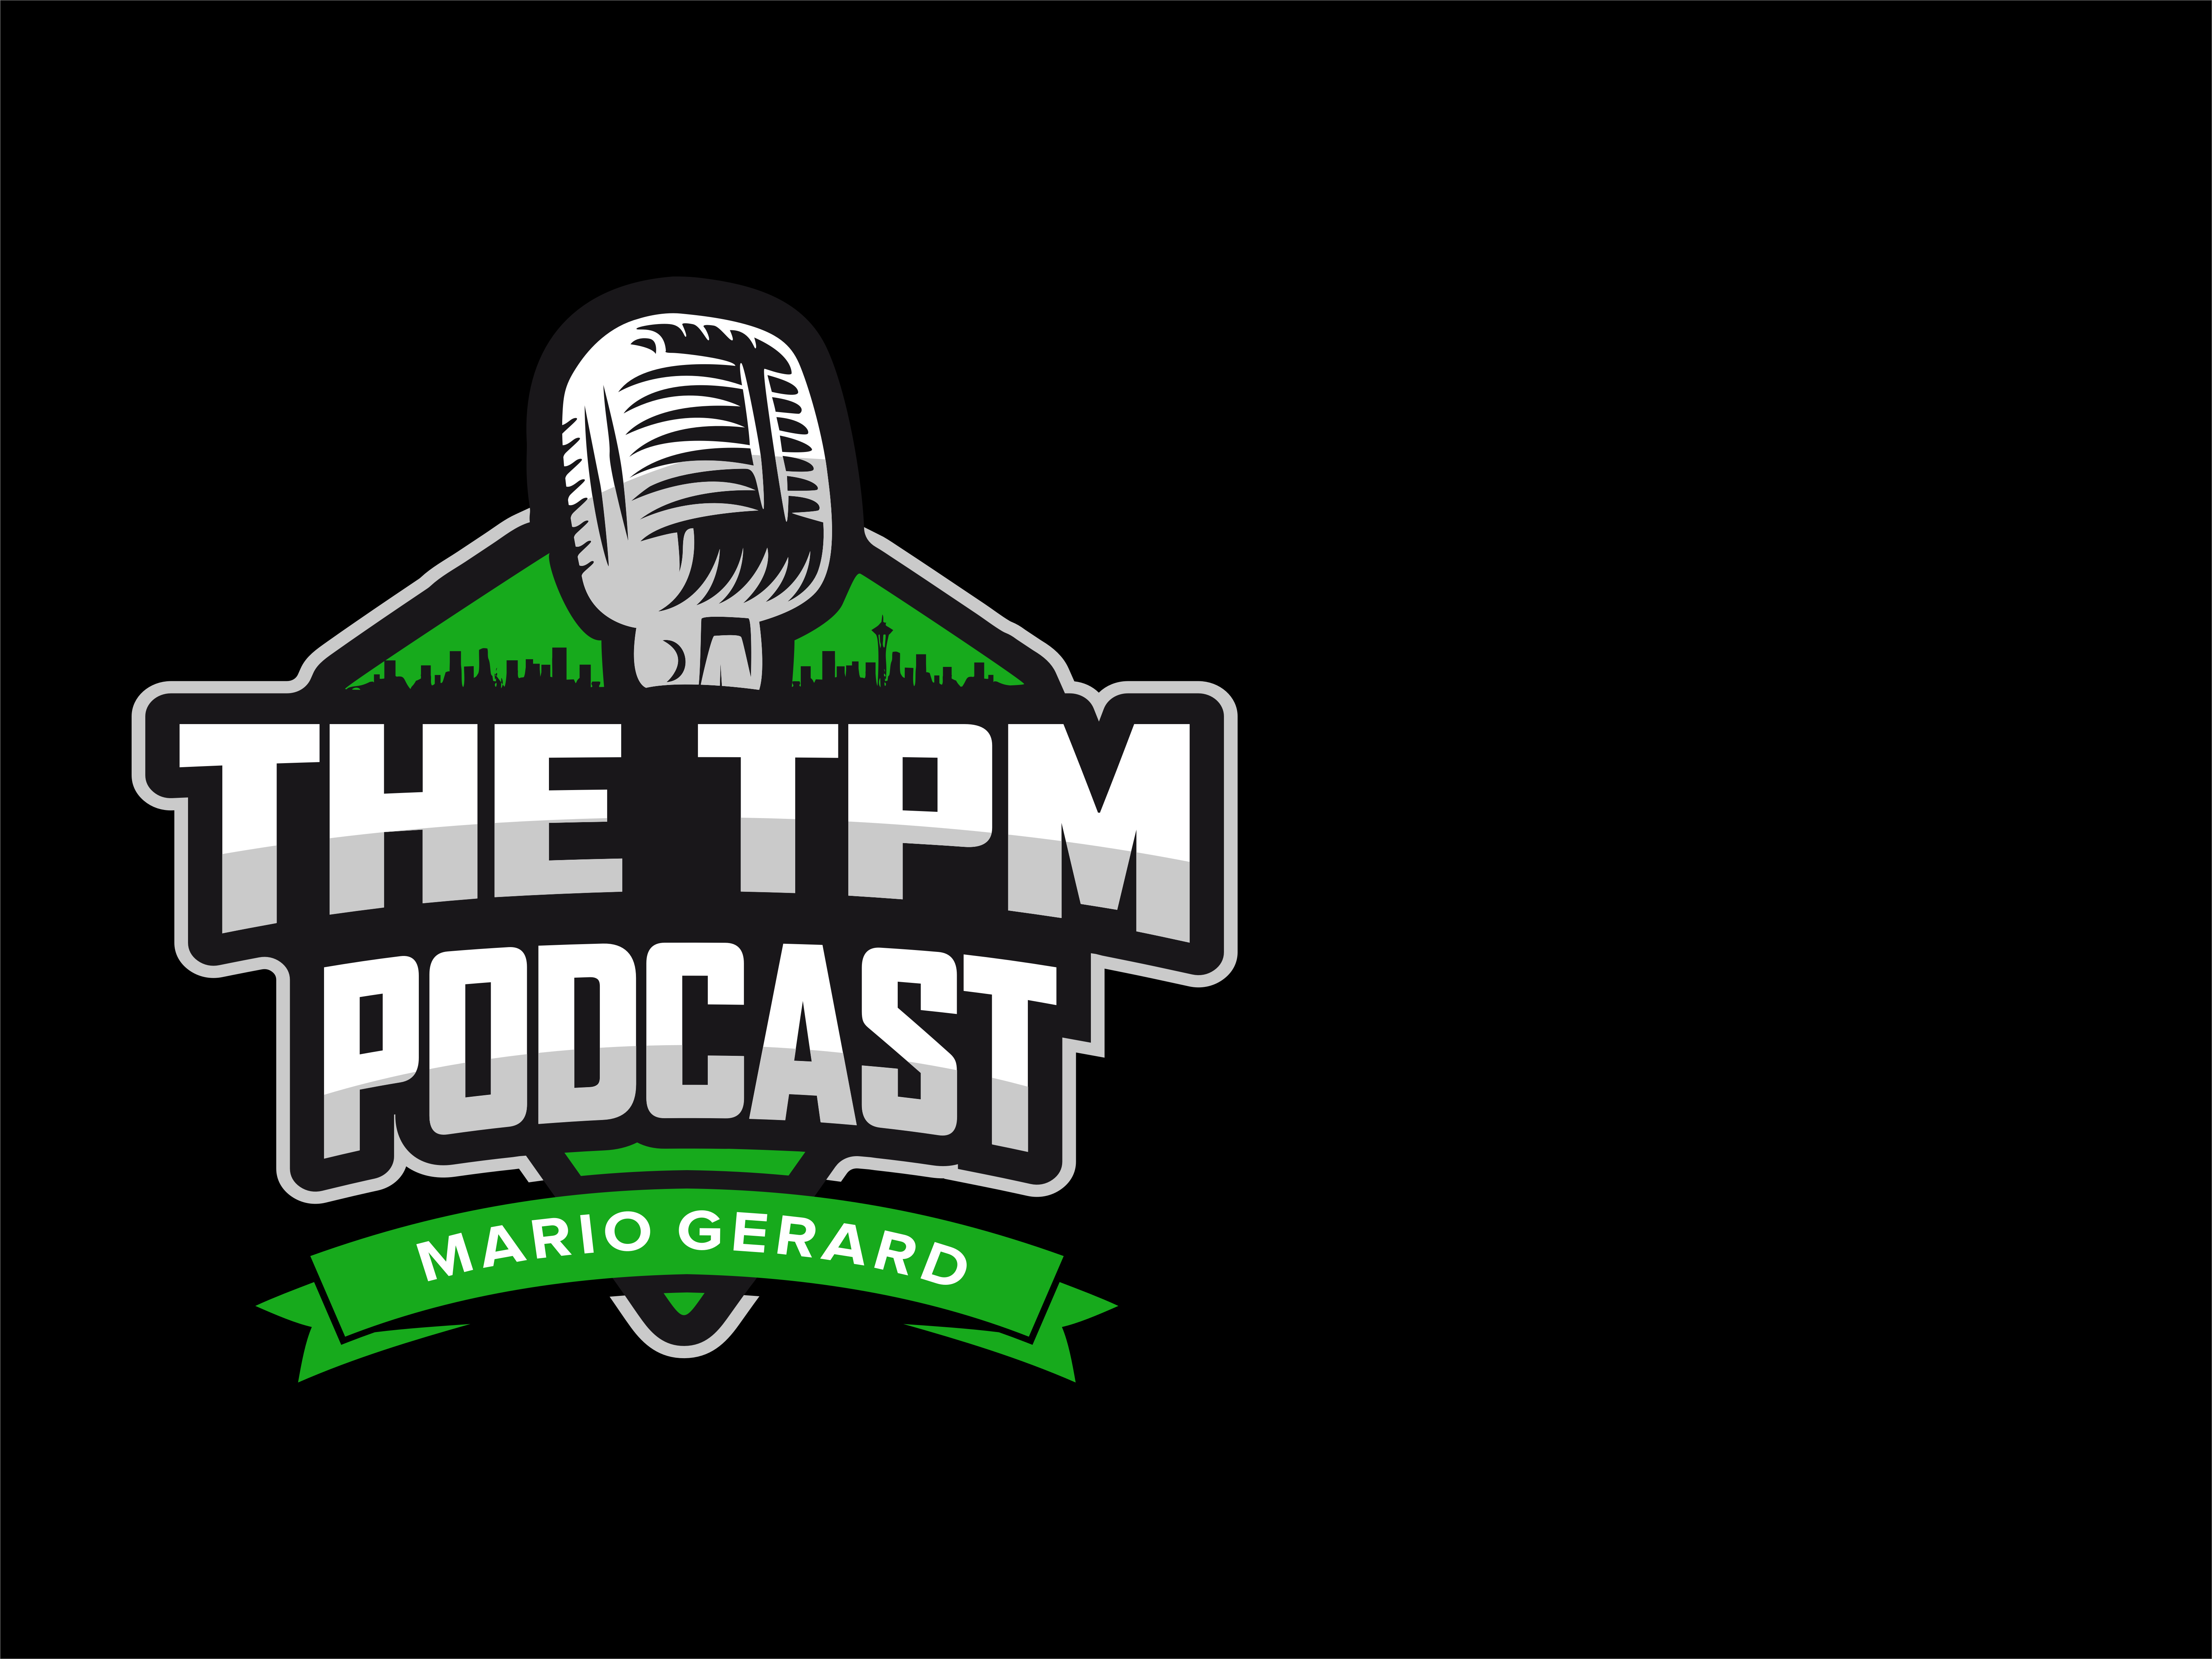 Episode 1: TPM 101 – The Technical Program Management Podcast with Mario Gerard